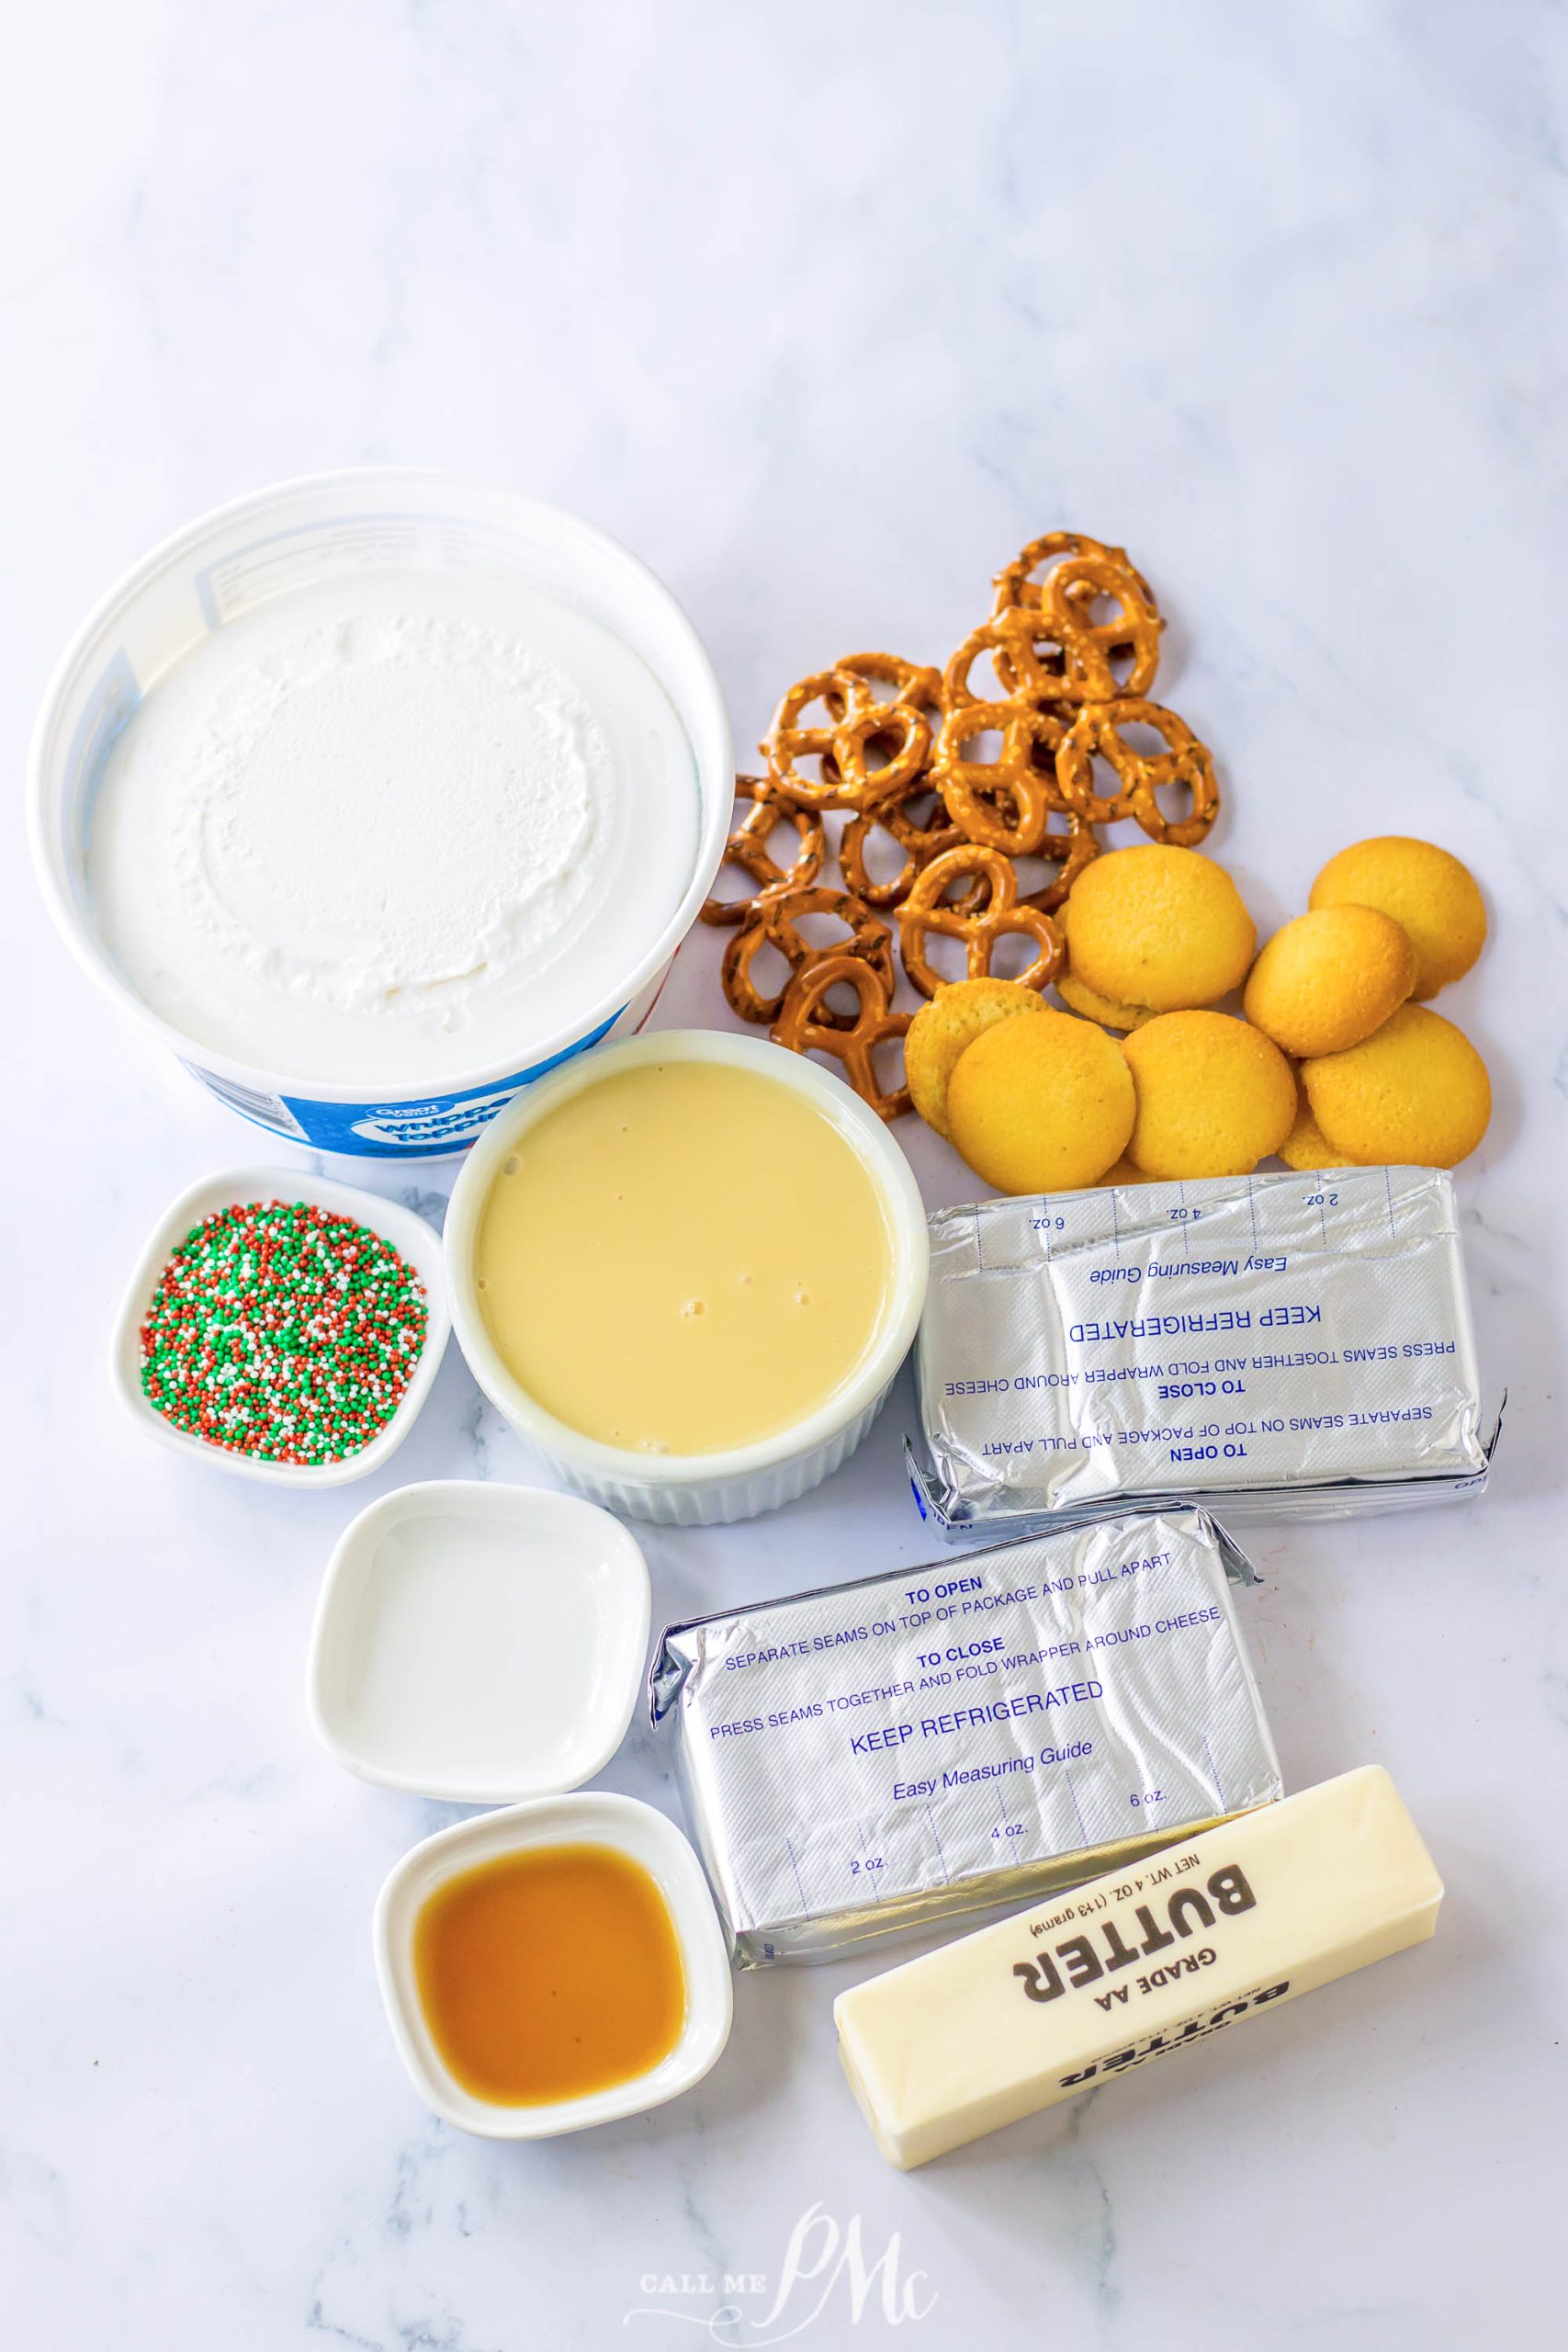 The ingredients for Funfetti Crunch Cake are laid out on a marble table.